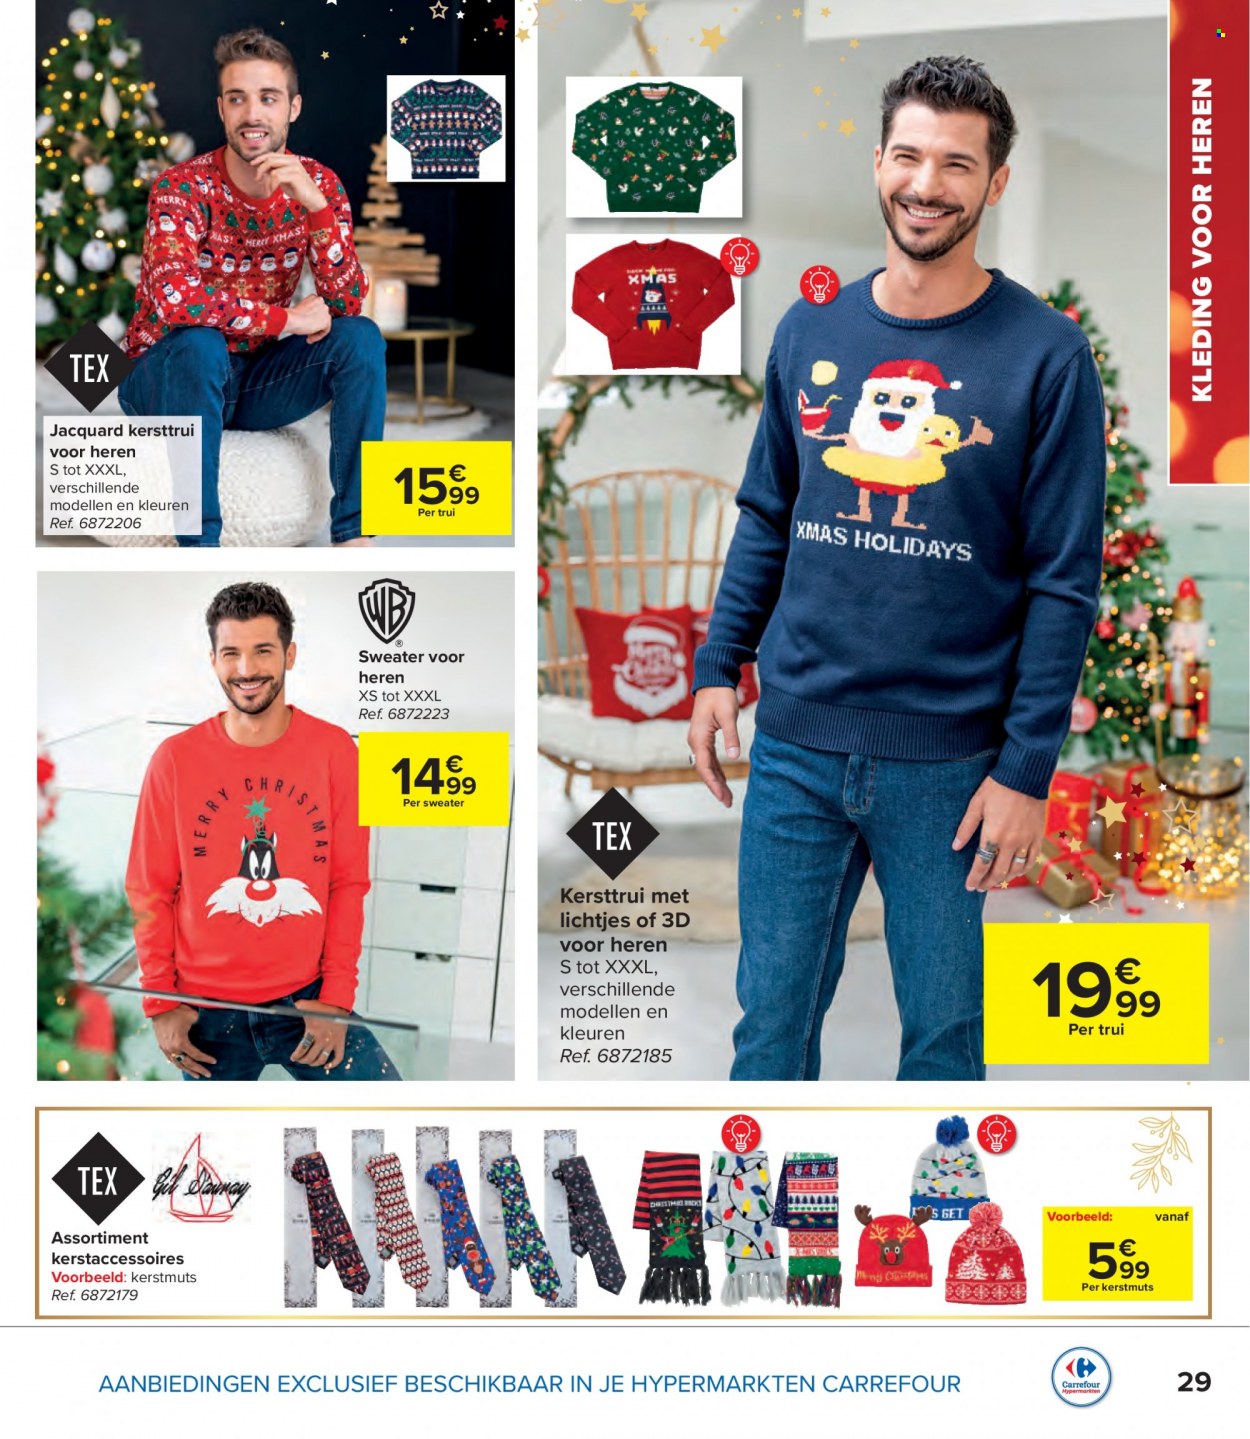 Catalogue Carrefour hypermarkt - 16.11.2022 - 31.12.2022. Page 29.